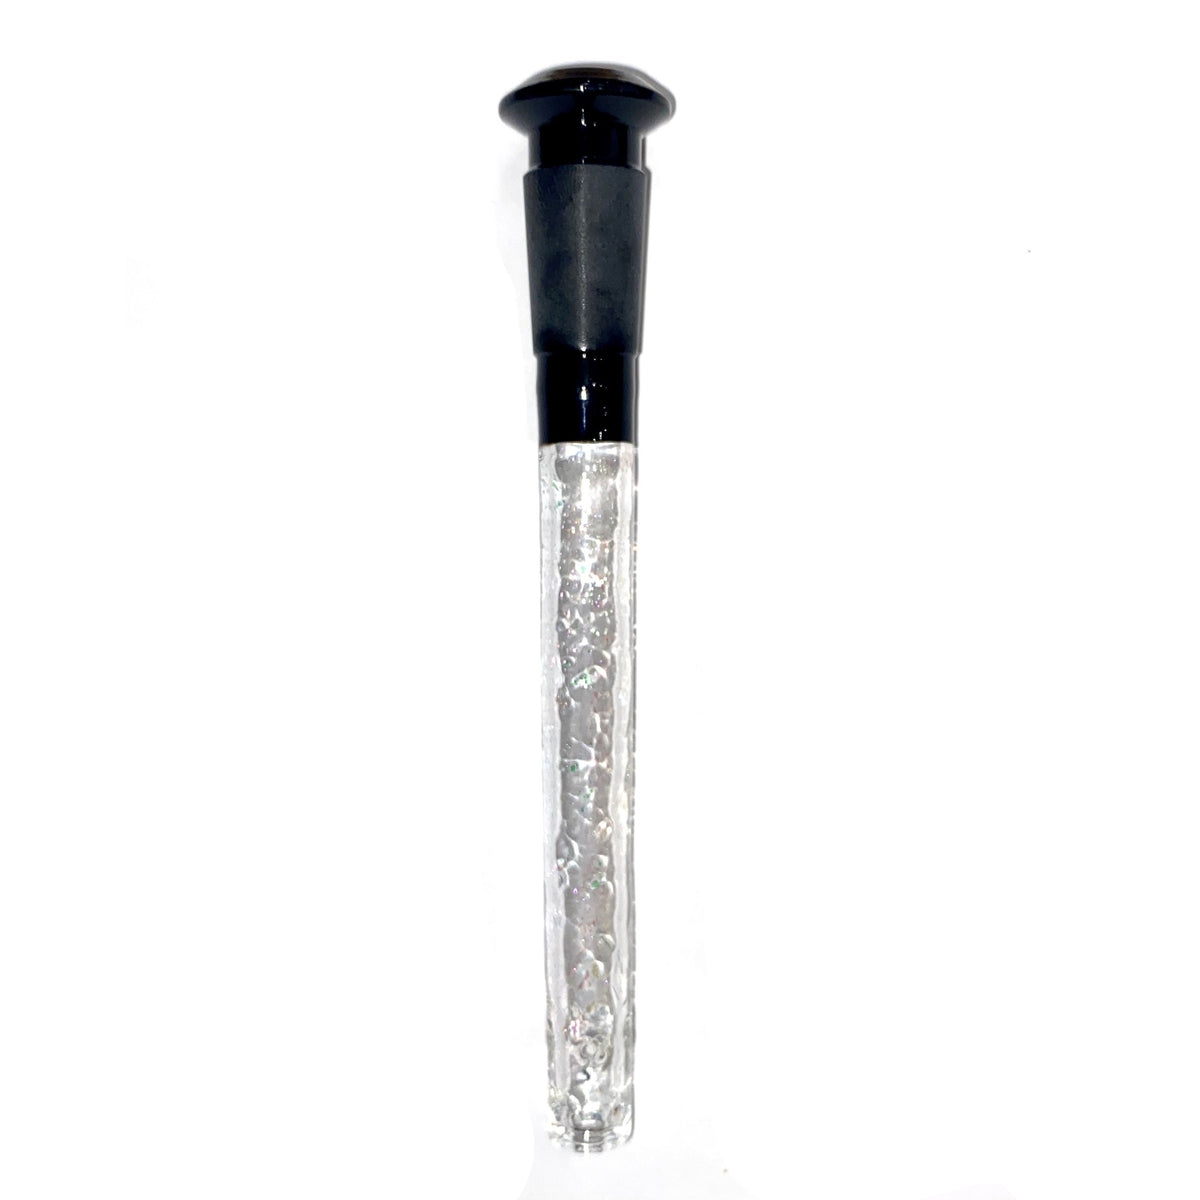 Dustorm Glass 18/14 Dichro Downstem (Clear) 6 Inch with Black Joint show variants